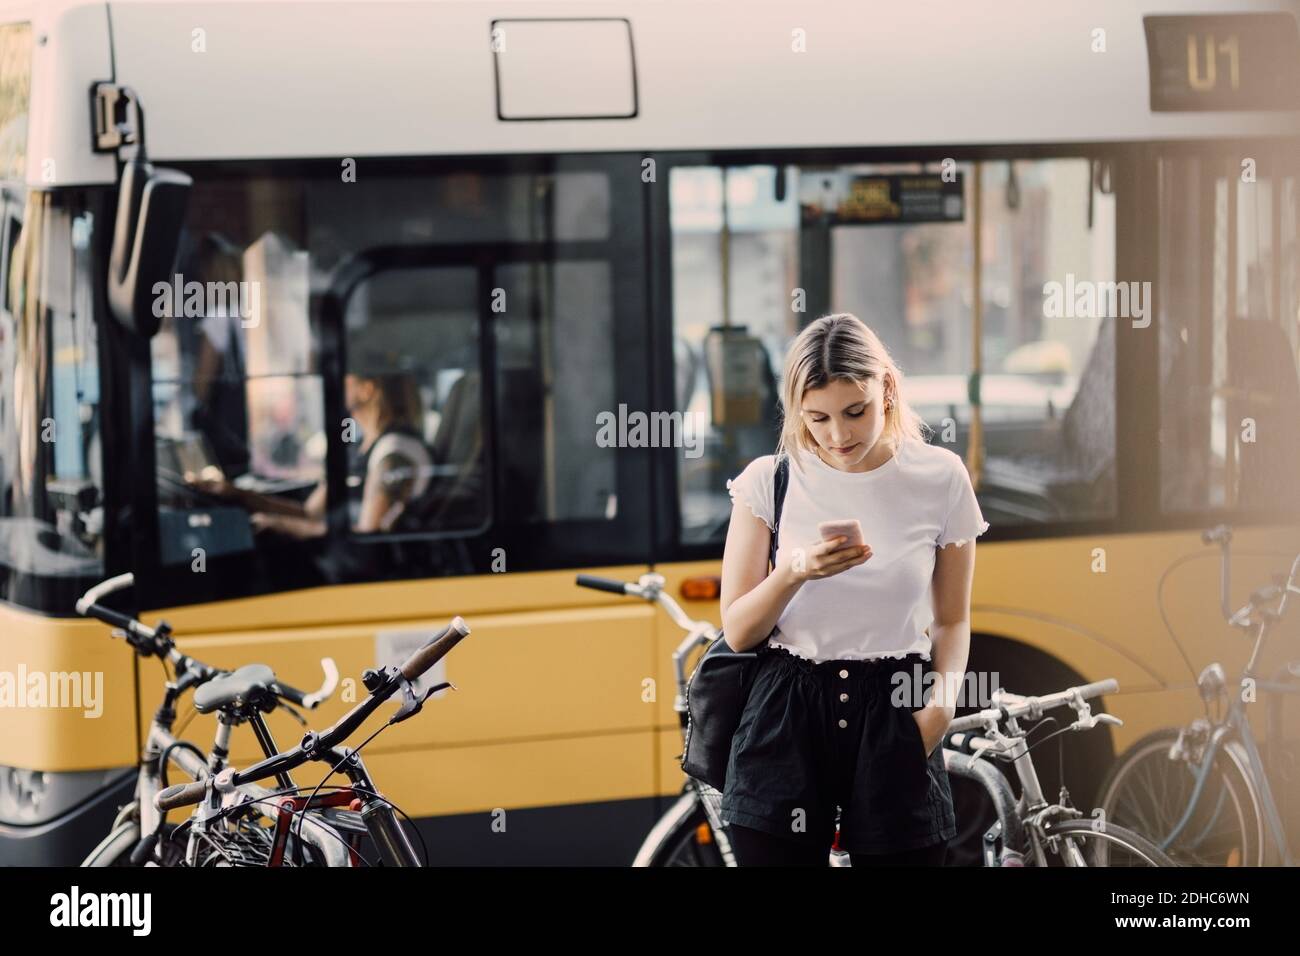 Young woman using smart phone while standing by bicycles against bus in city Stock Photo